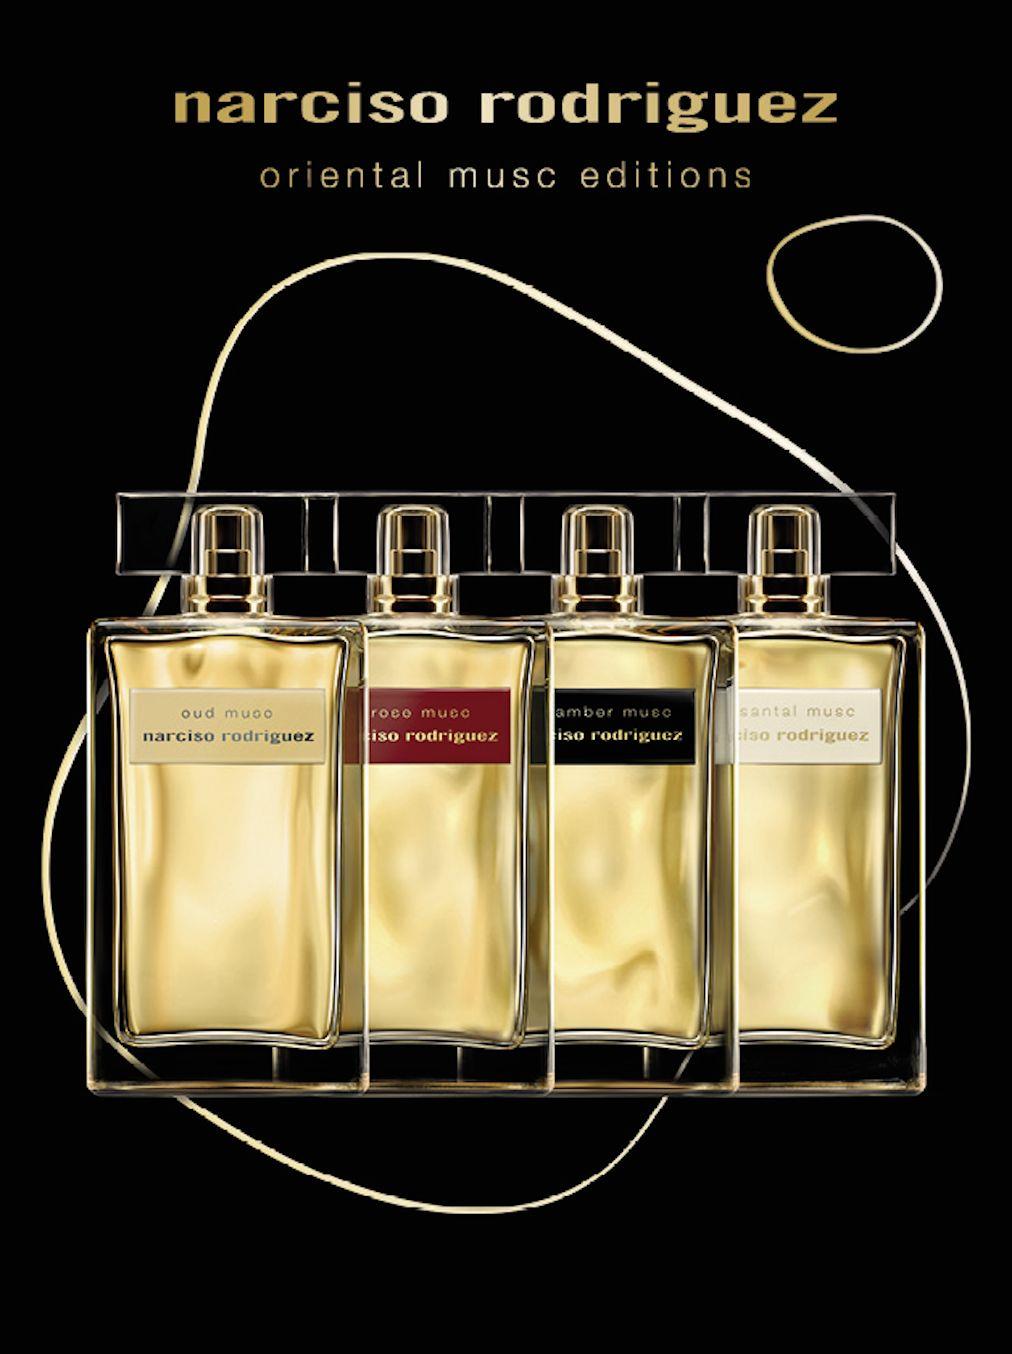 Narciso Rodriguez Amber Musc oil Sample perfume samples & decants - The Perfumed Court